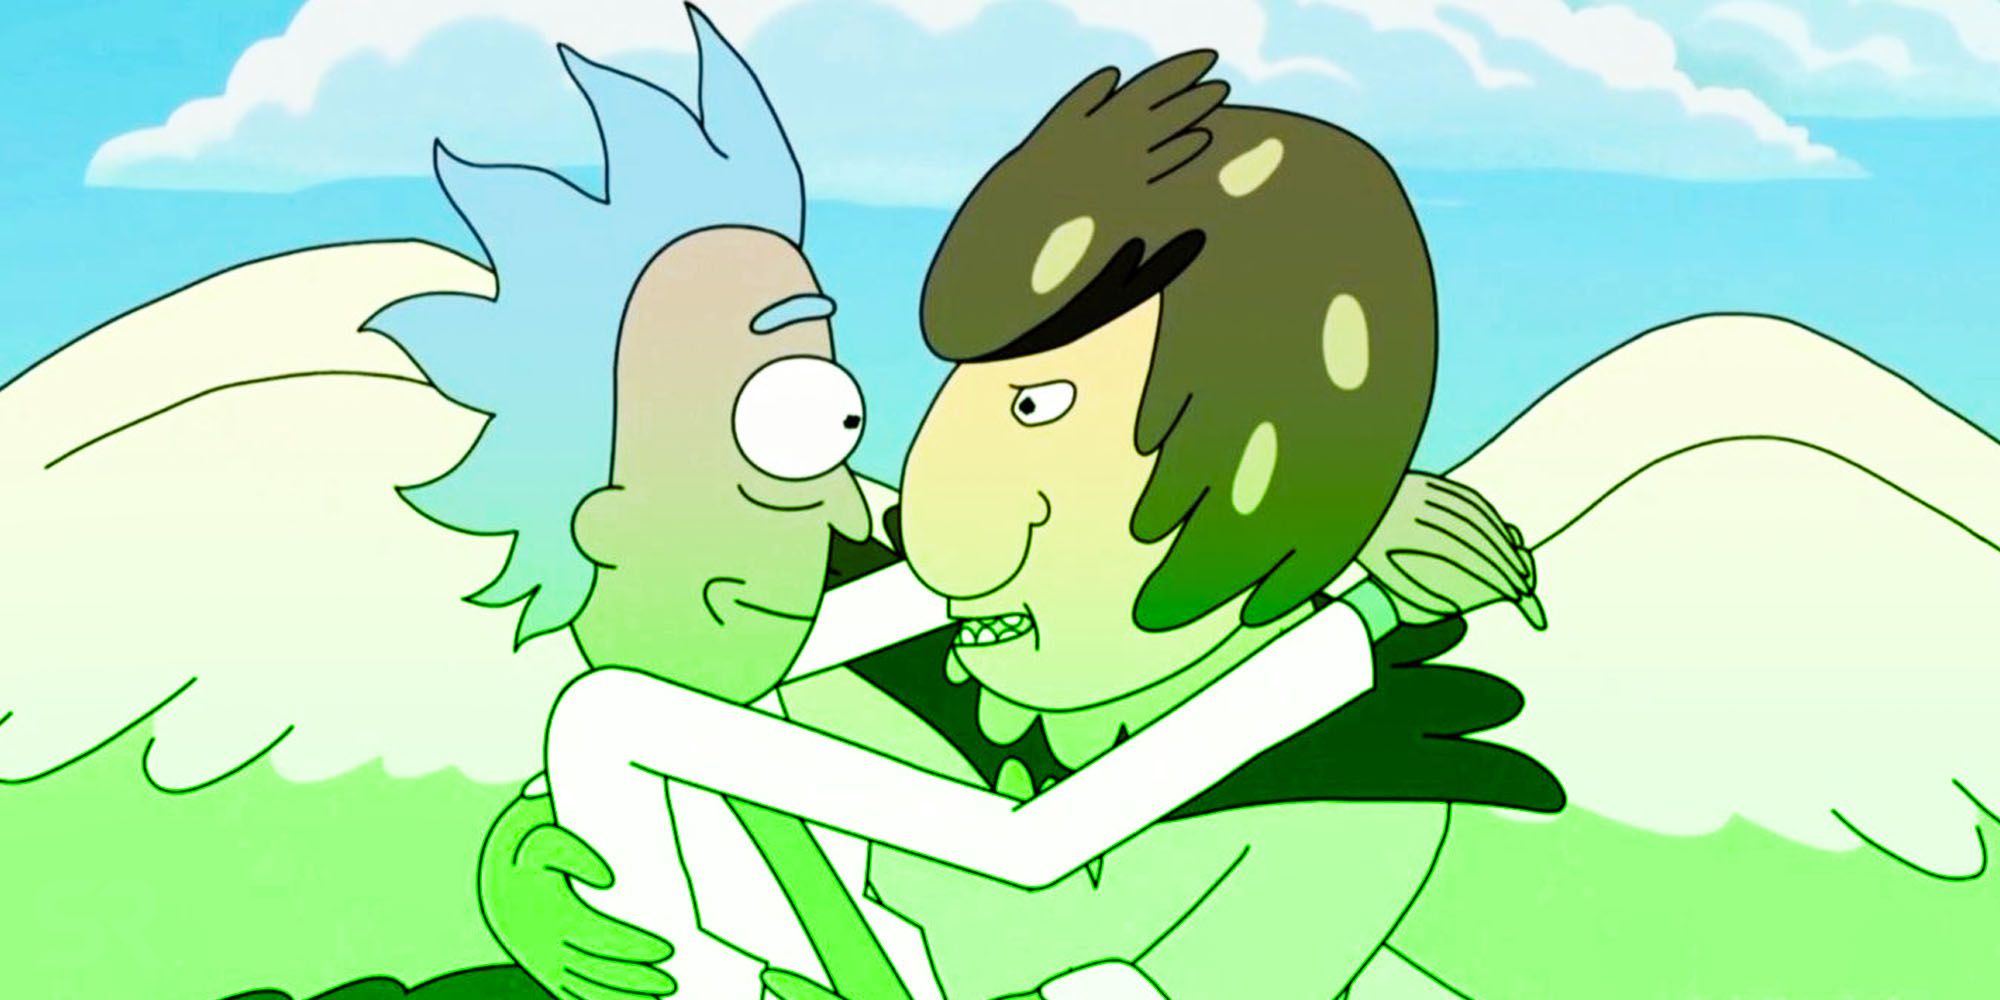 Rick and morty birdperson relationship